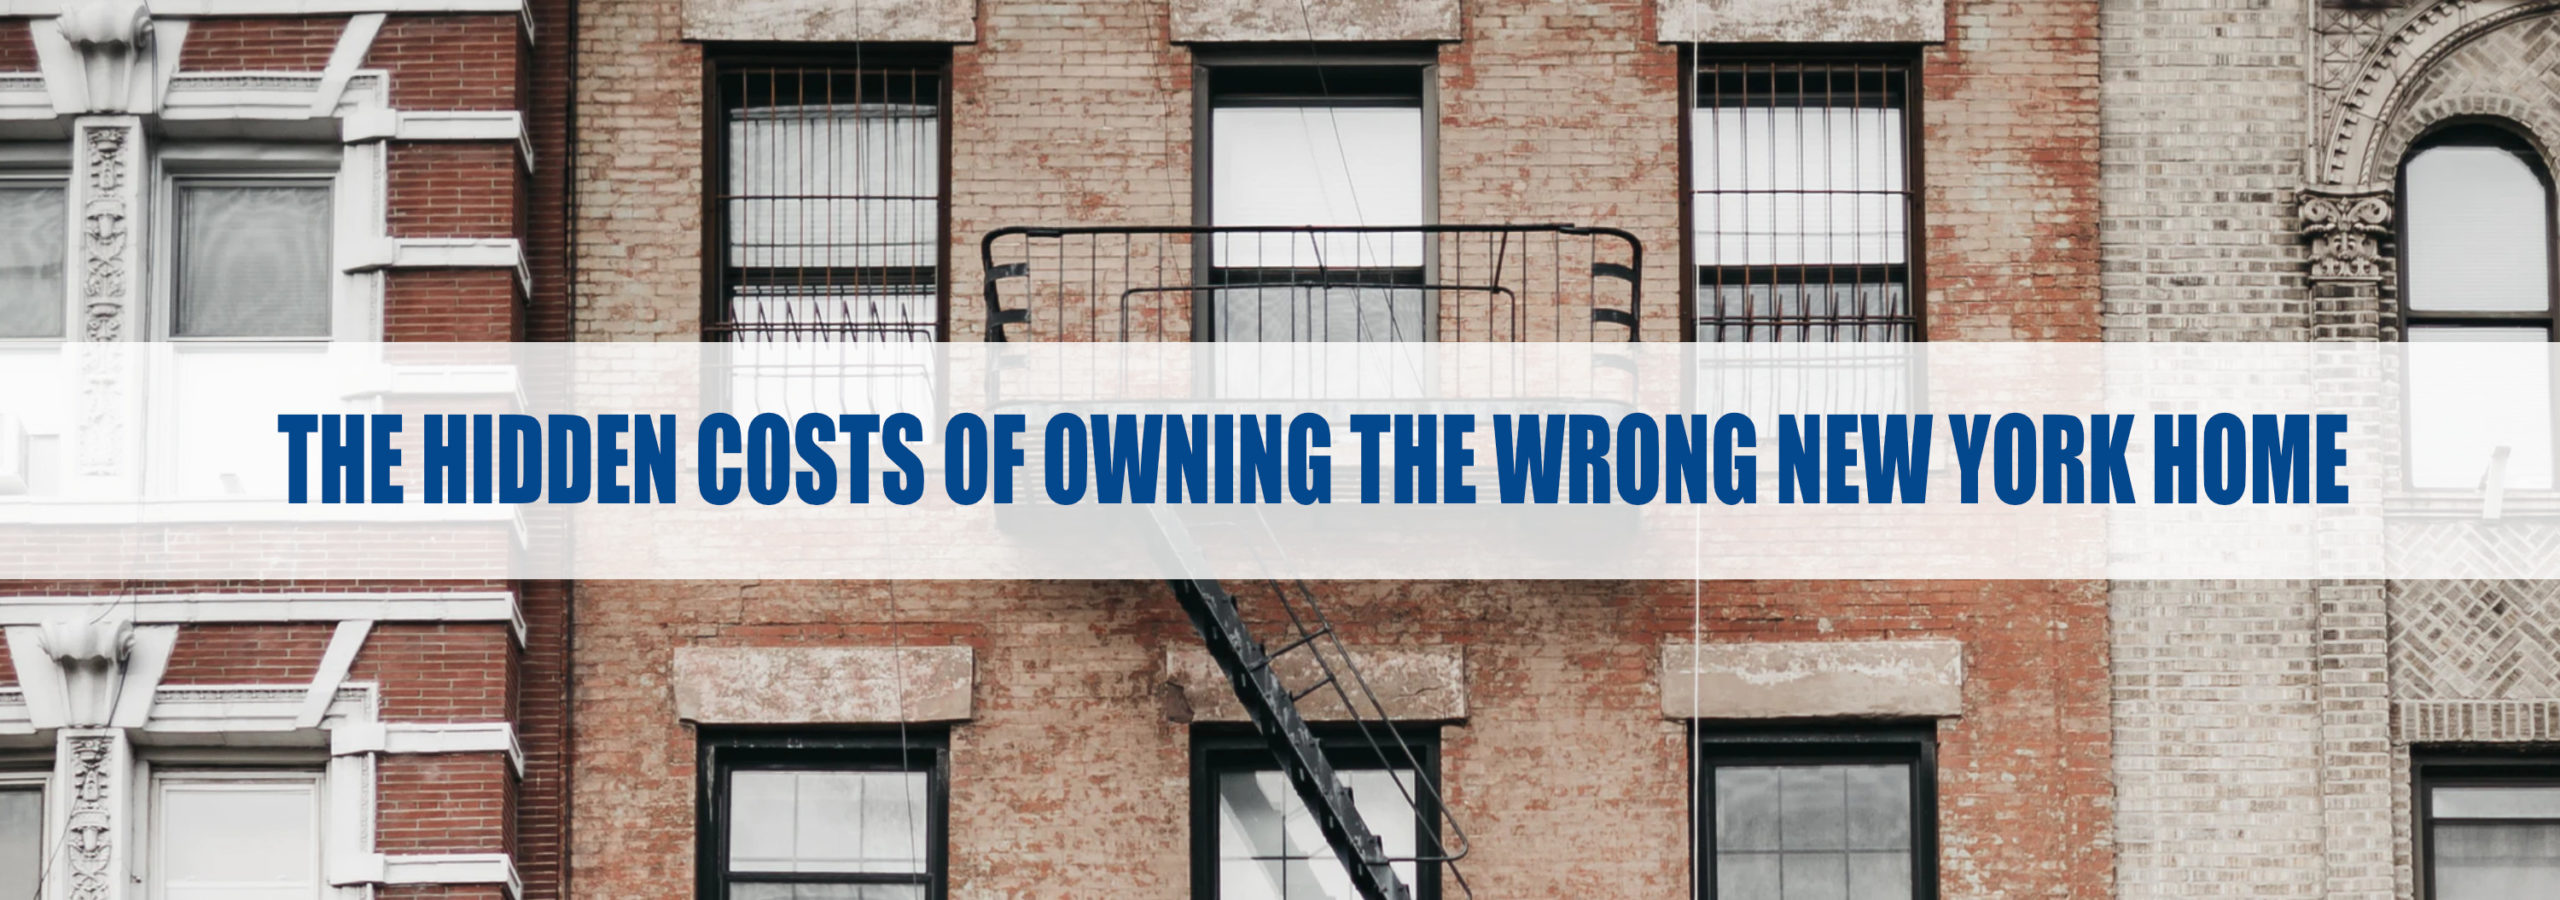 The Hidden Costs of Owning the Wrong New York Home